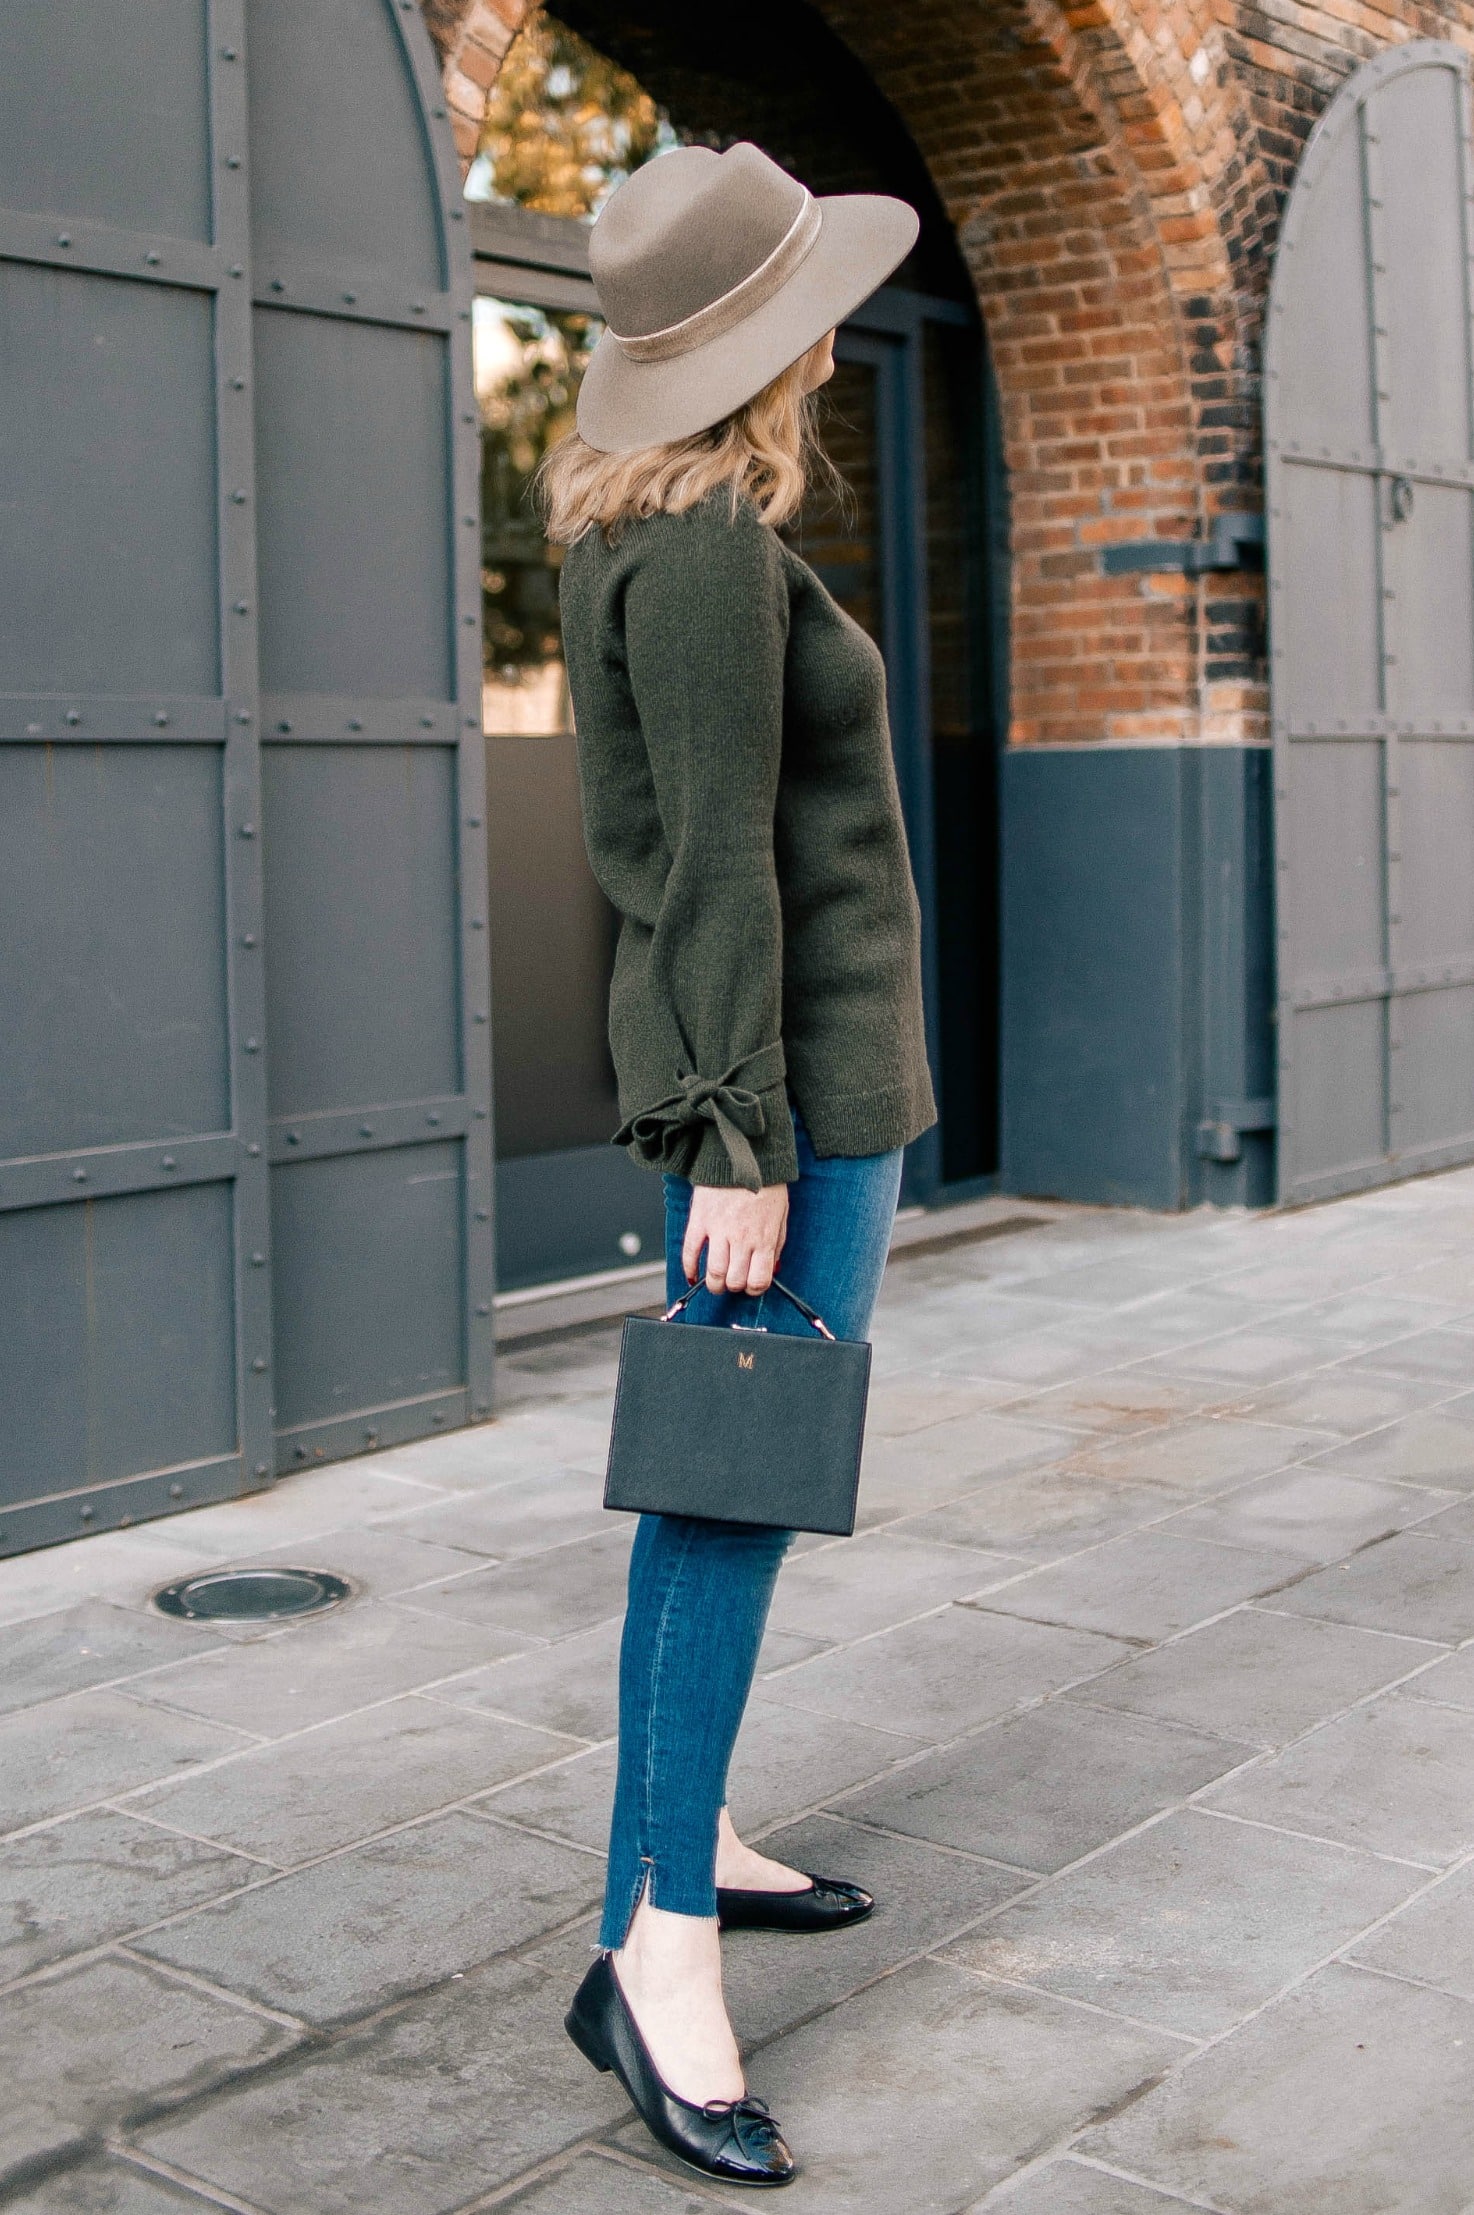 Fall Outfit Inspo: Ann Taylor Sweater, Rag & Bone Hat